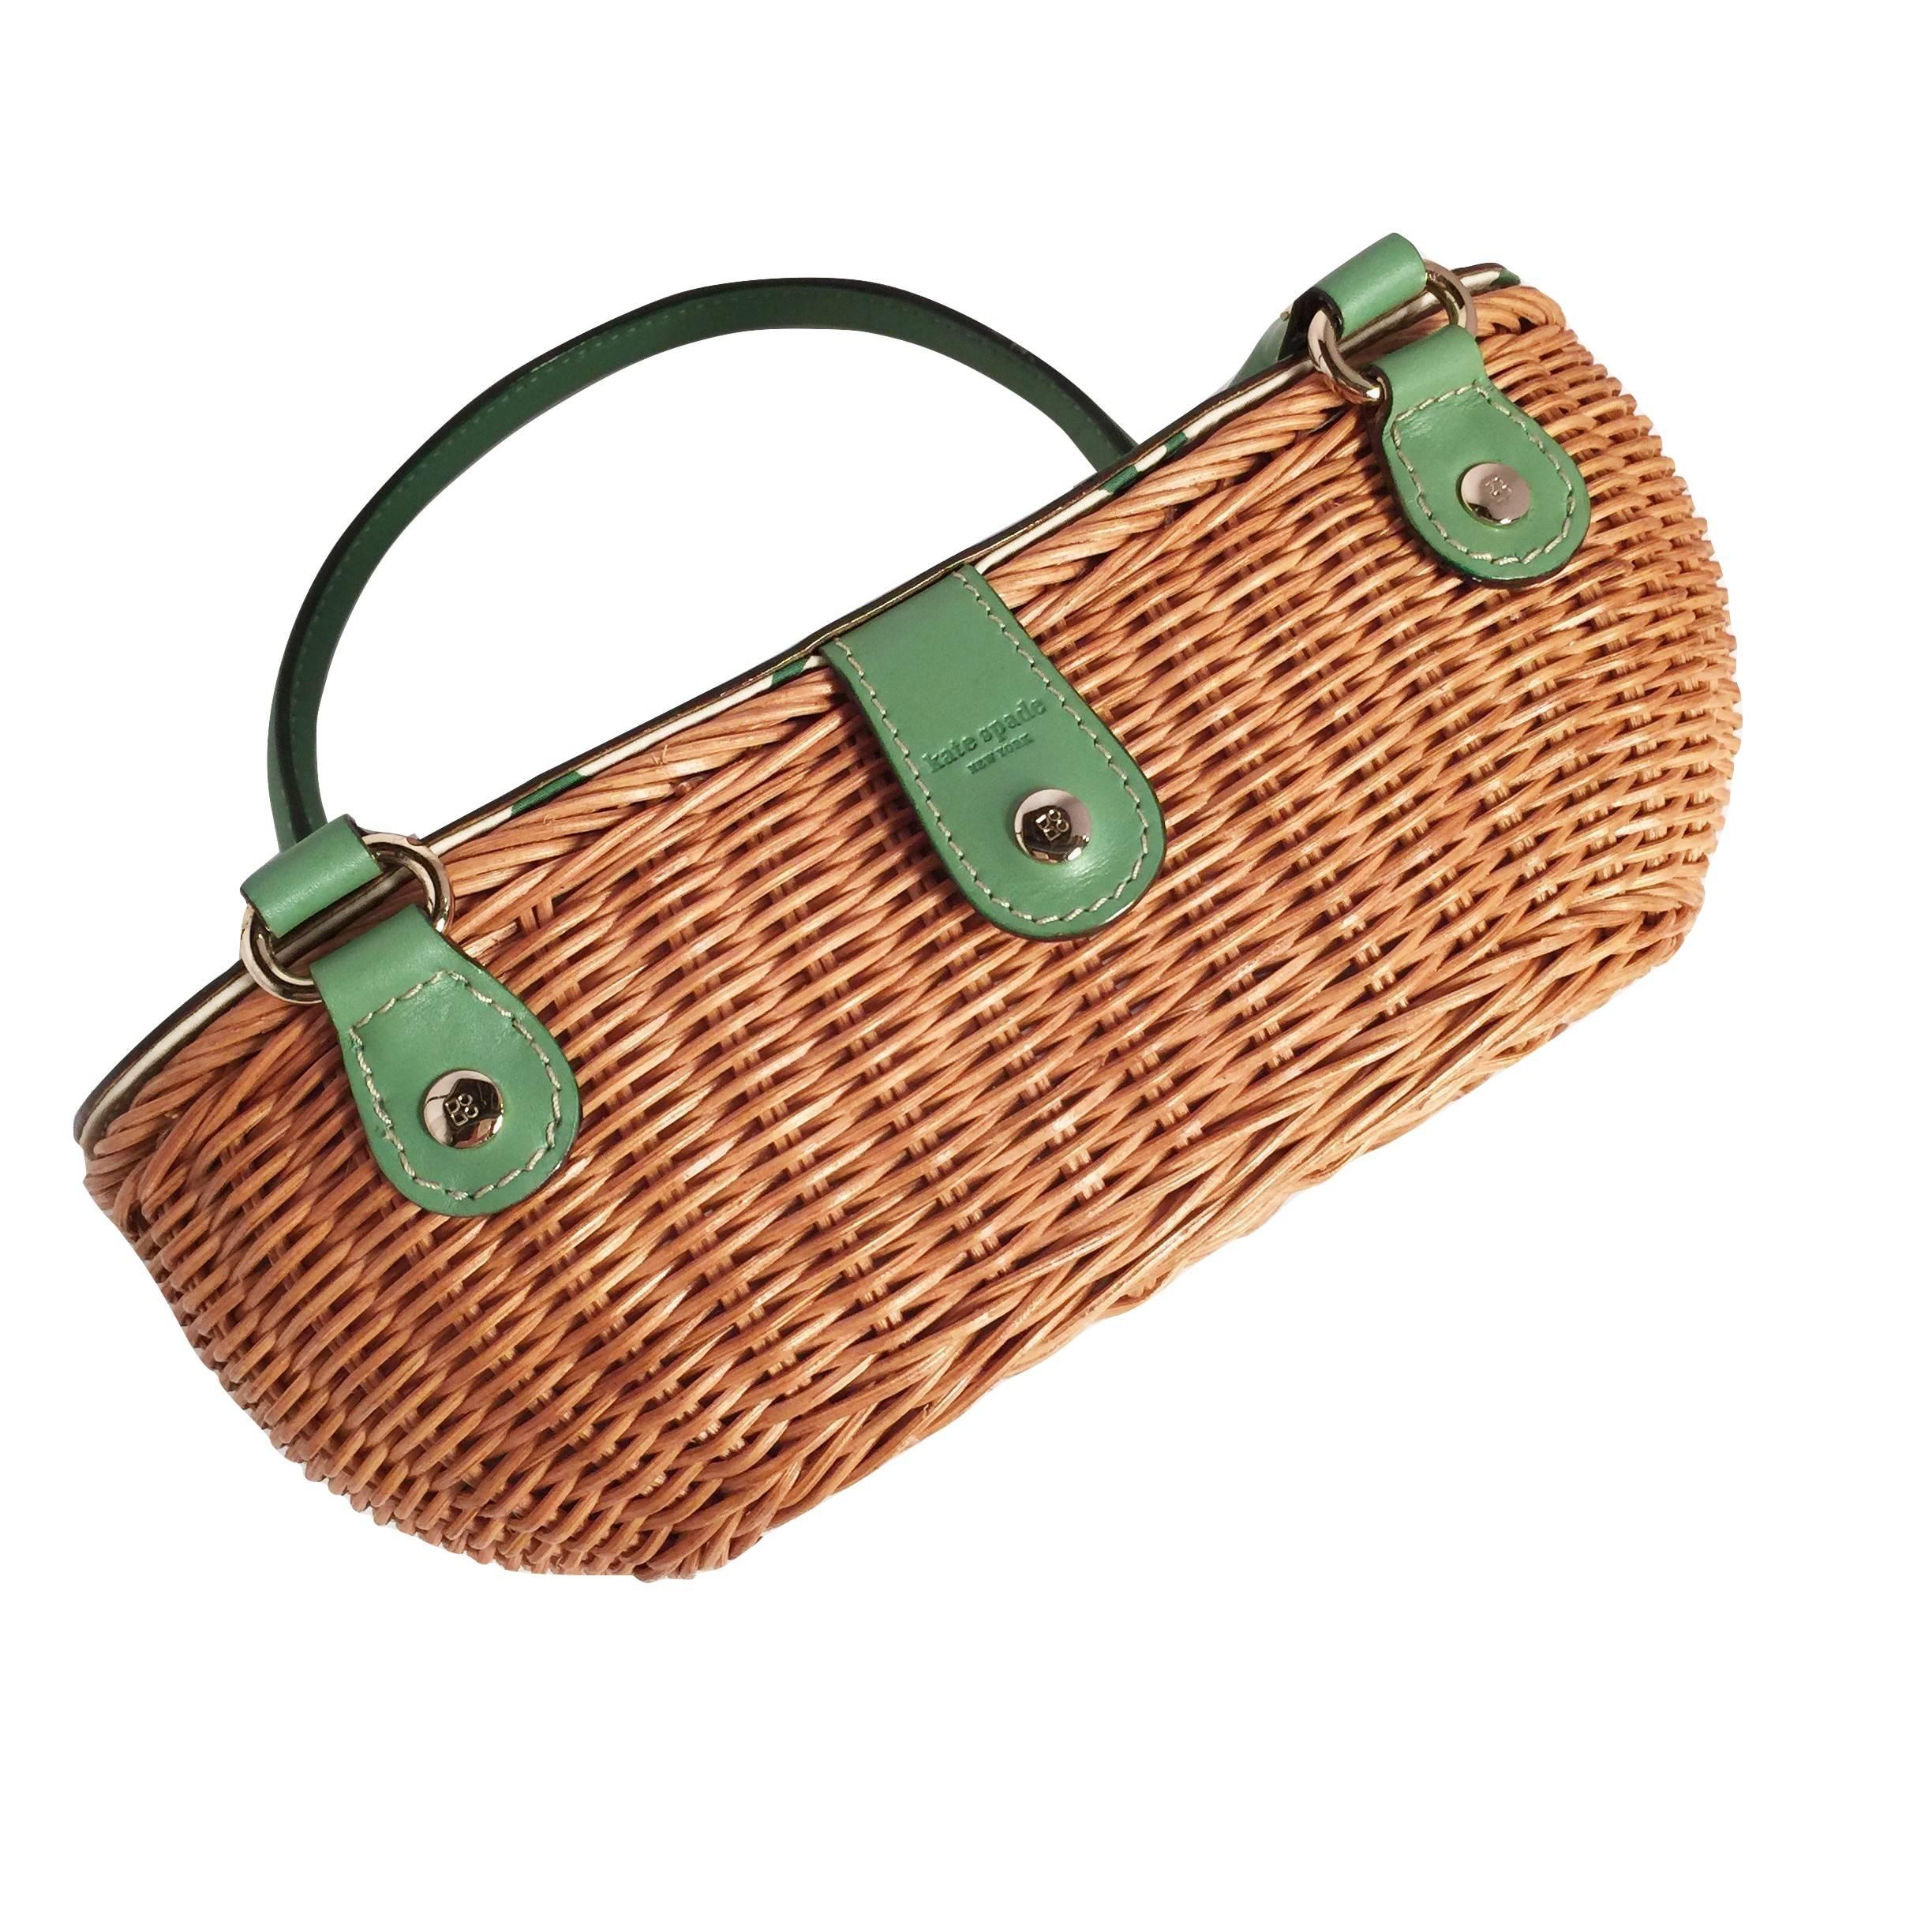 New Kate Spade Her Rare Large Collectible Spring 2005 Green Wicker Basket Bag  3